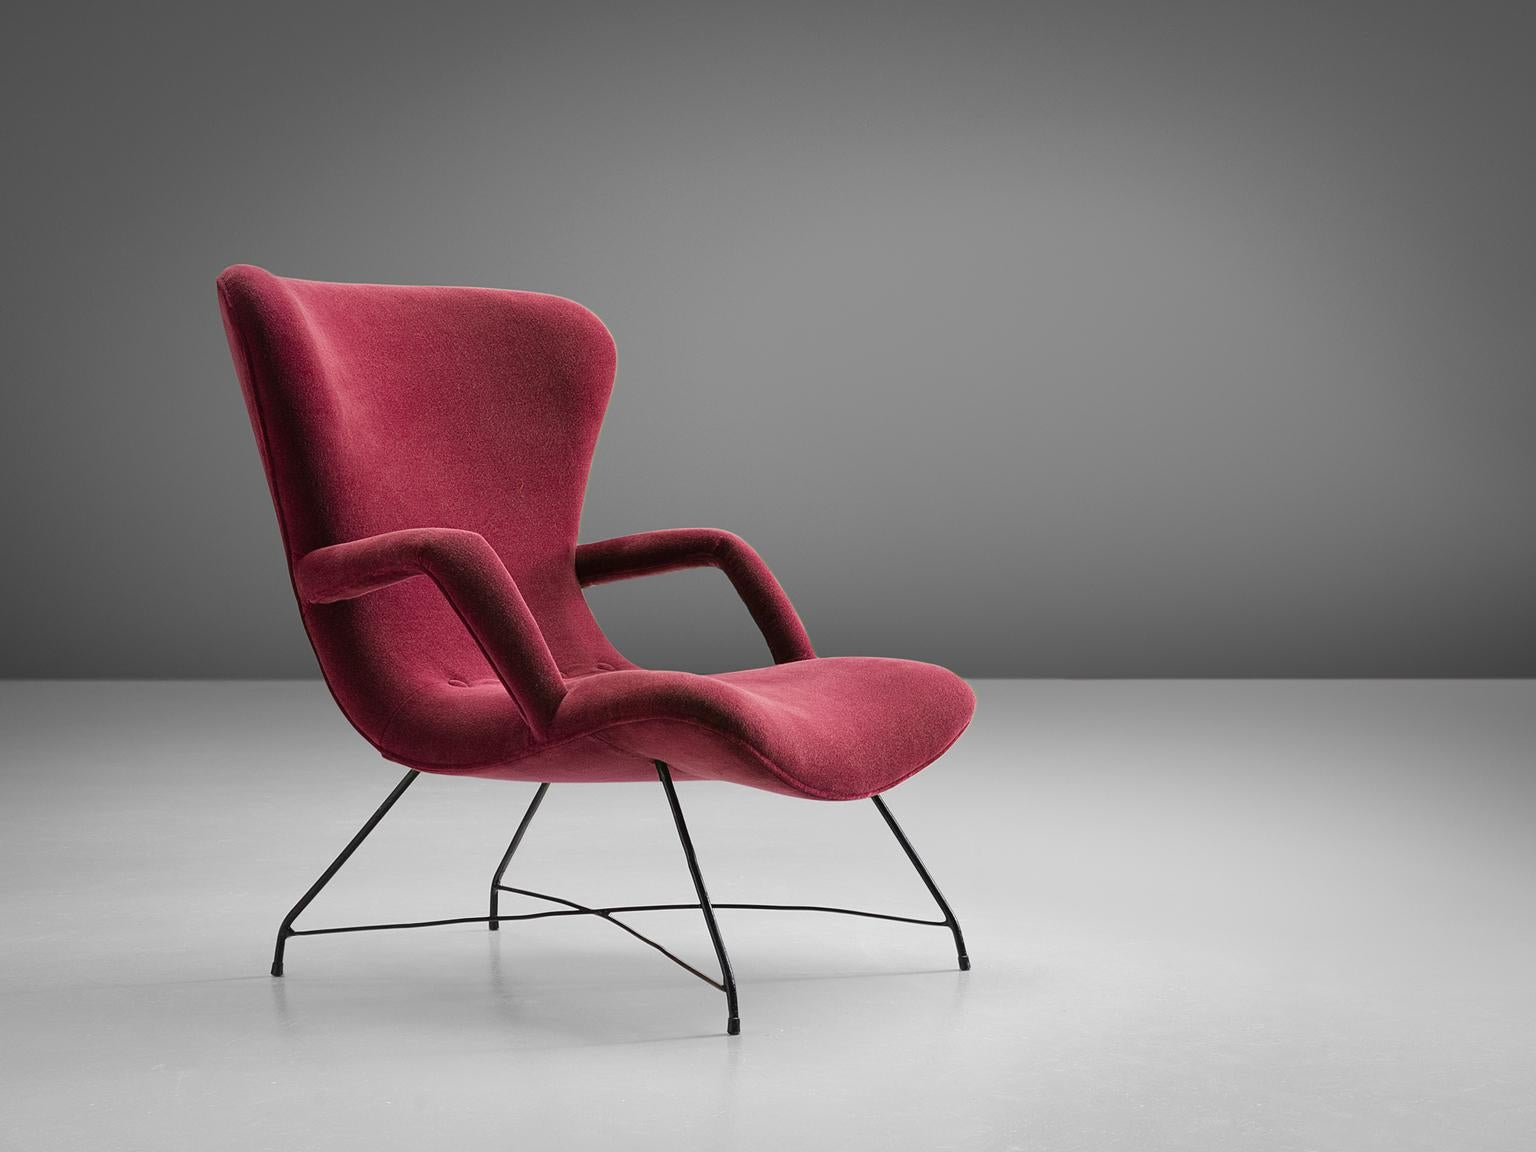 Carlo Hauner and Martin Eisler for Forma, lounge chair, in iron and velvet fabric, Brazil, 1950s. 

Elegant and modern armchairs by Brazilian designer duo Hauner & Eisler. The frame is made from thin, elegant wrought iron. Due the diagonal